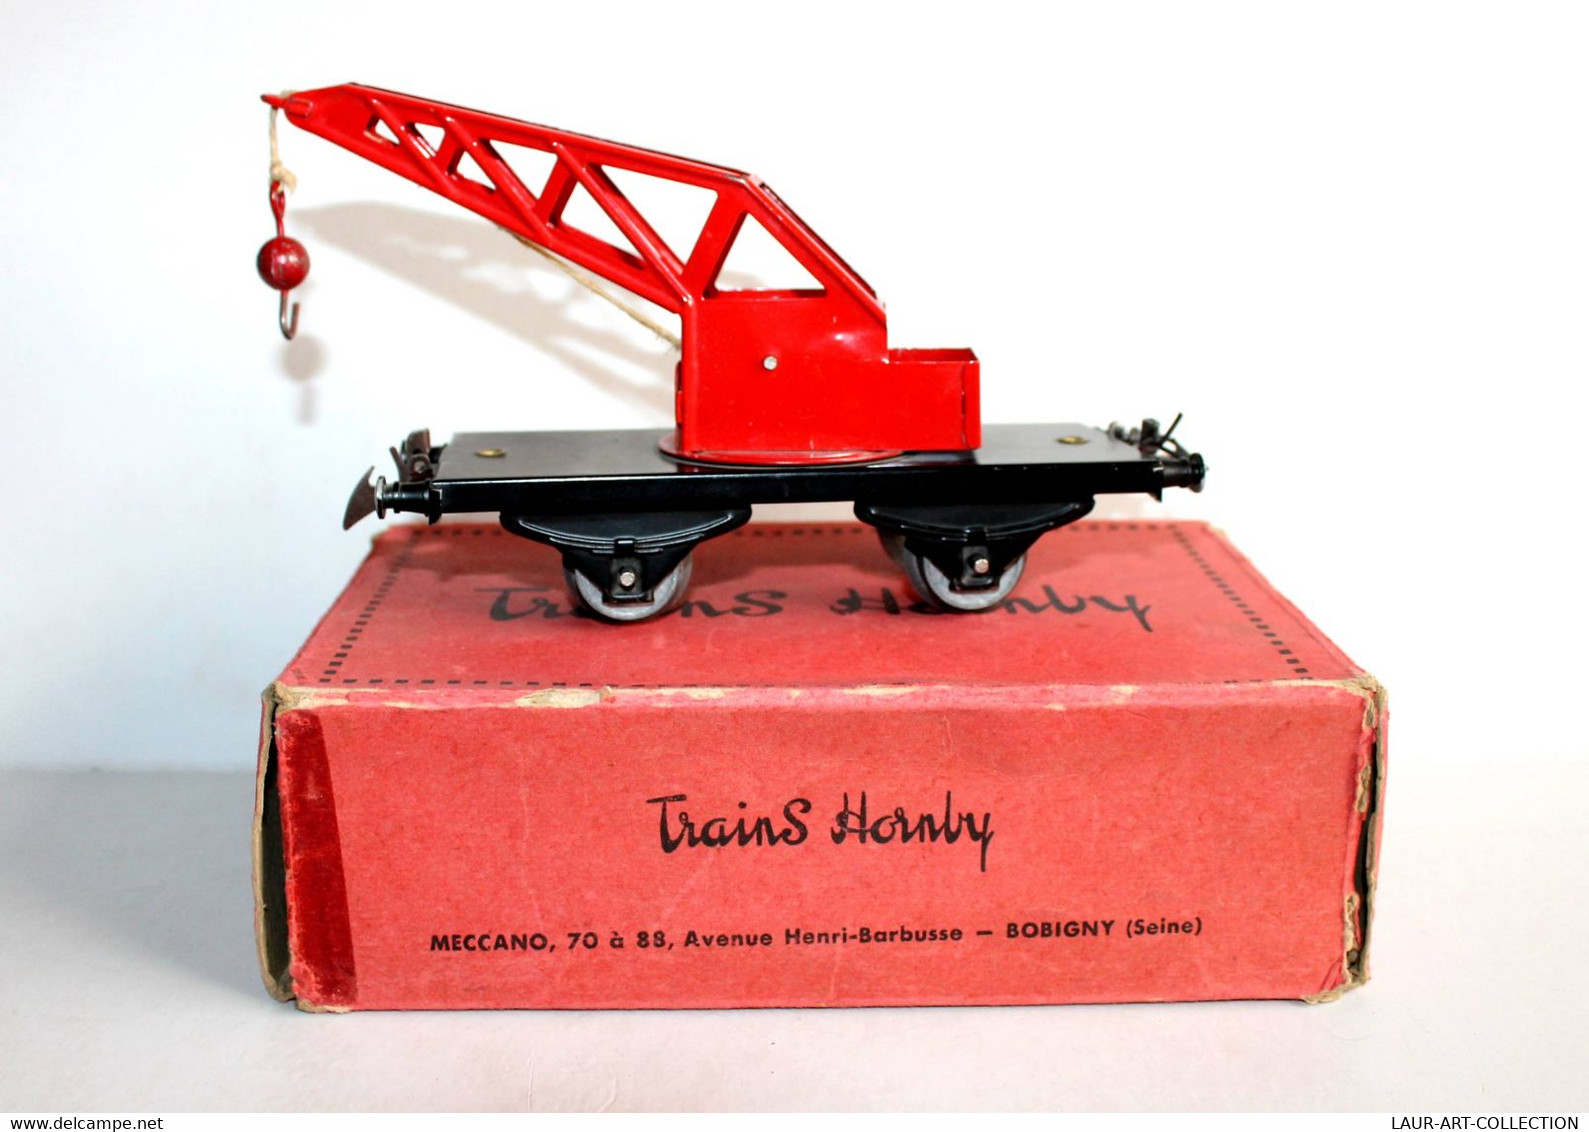 HORNBY - WAGON GRUE N°1 TREUIL, A POULIE PALAN LEVAGE, A ESSIEUX ECH:O MINIATURE - MODELISME FERROVIAIRE (2811.48) - Goods Waggons (wagons)